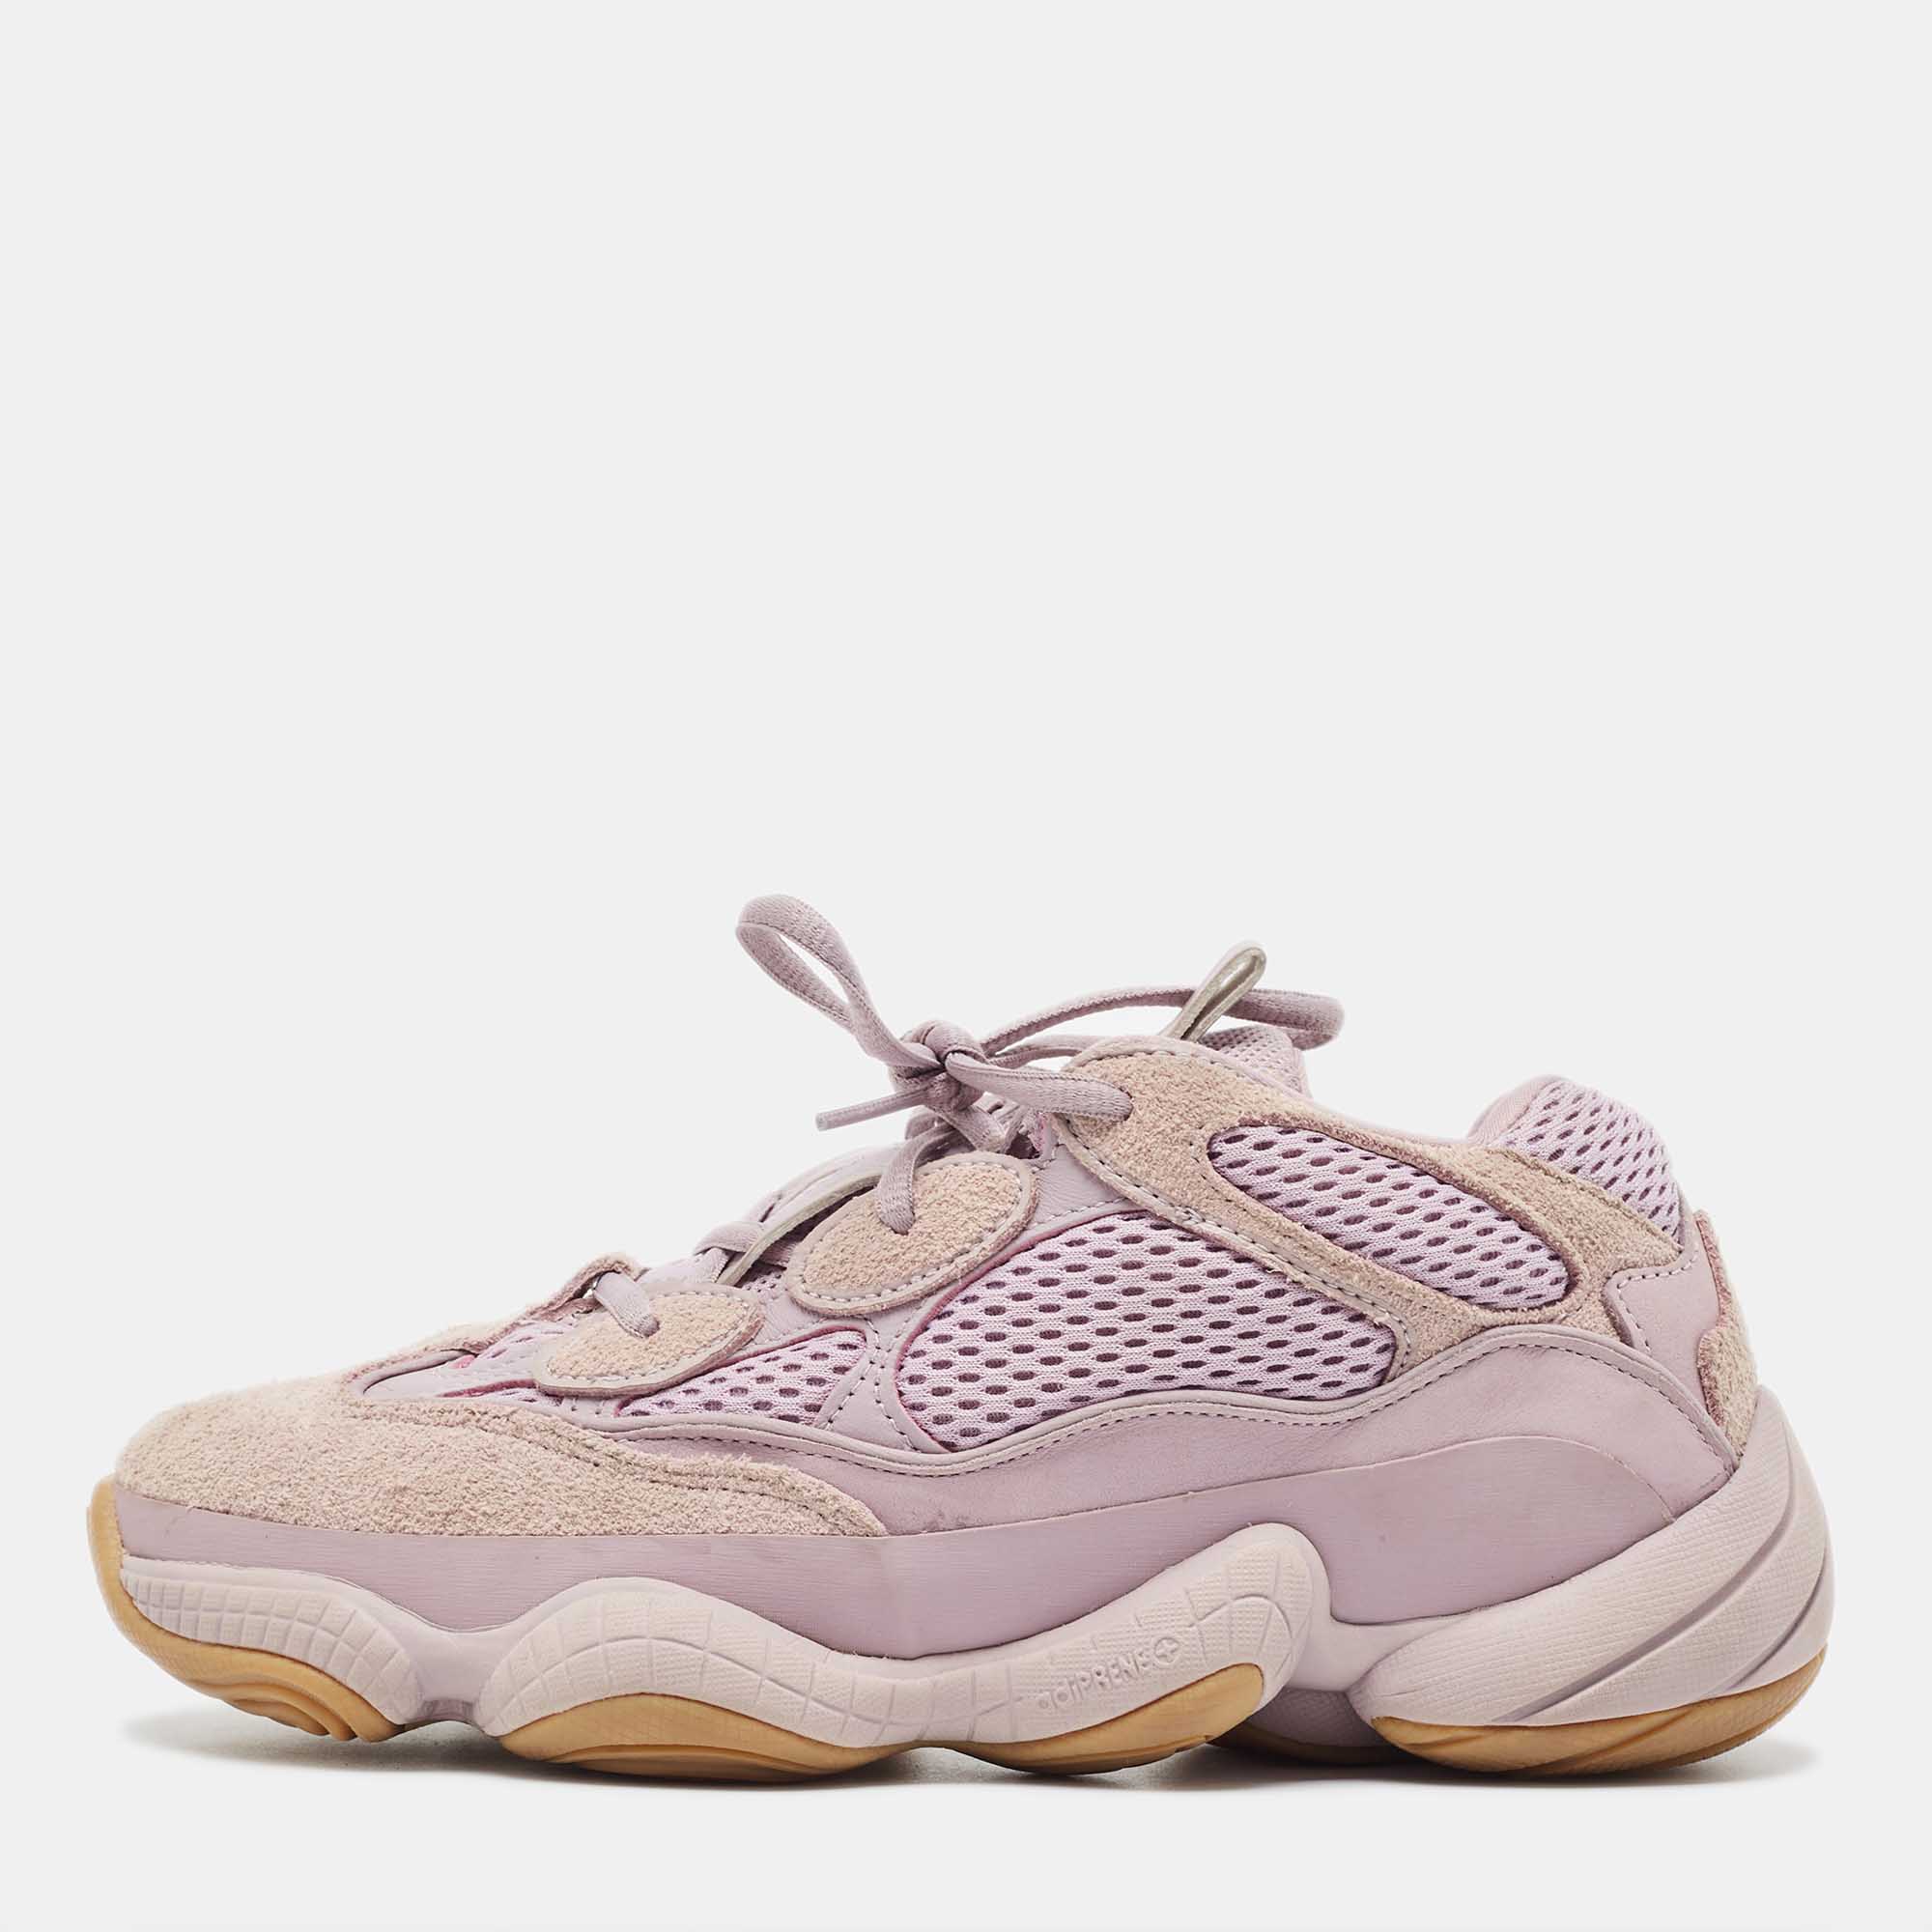 

Adidas x Yeezy Purple Mesh and Suede Boost Yeezy 500 Soft vision Sneakers Size